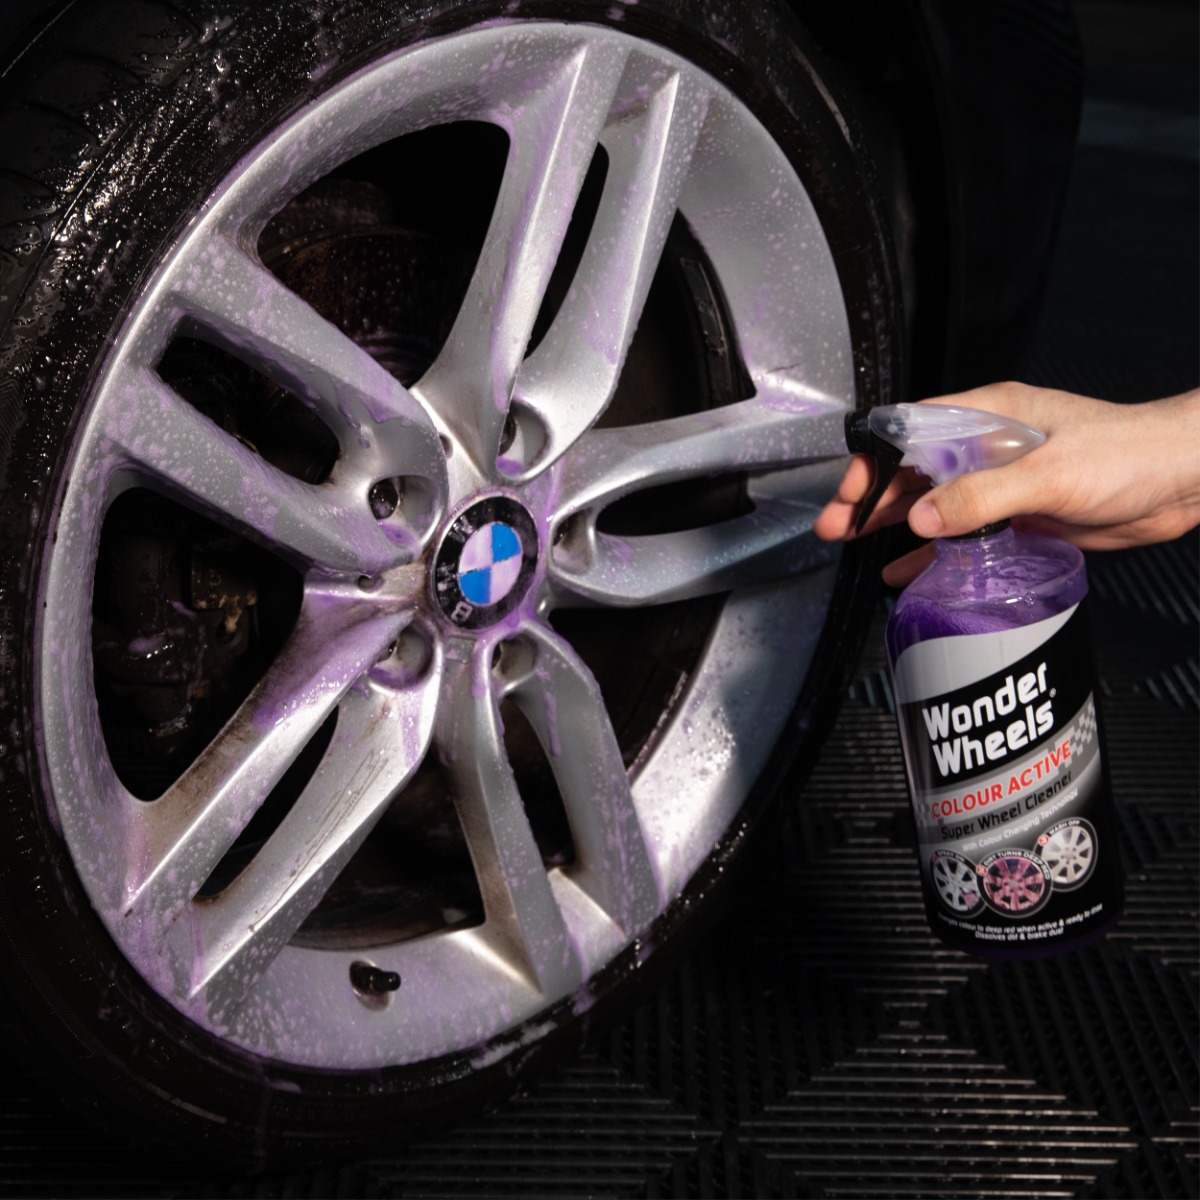 Spray Colour Active Wheel Cleaner on to wheel